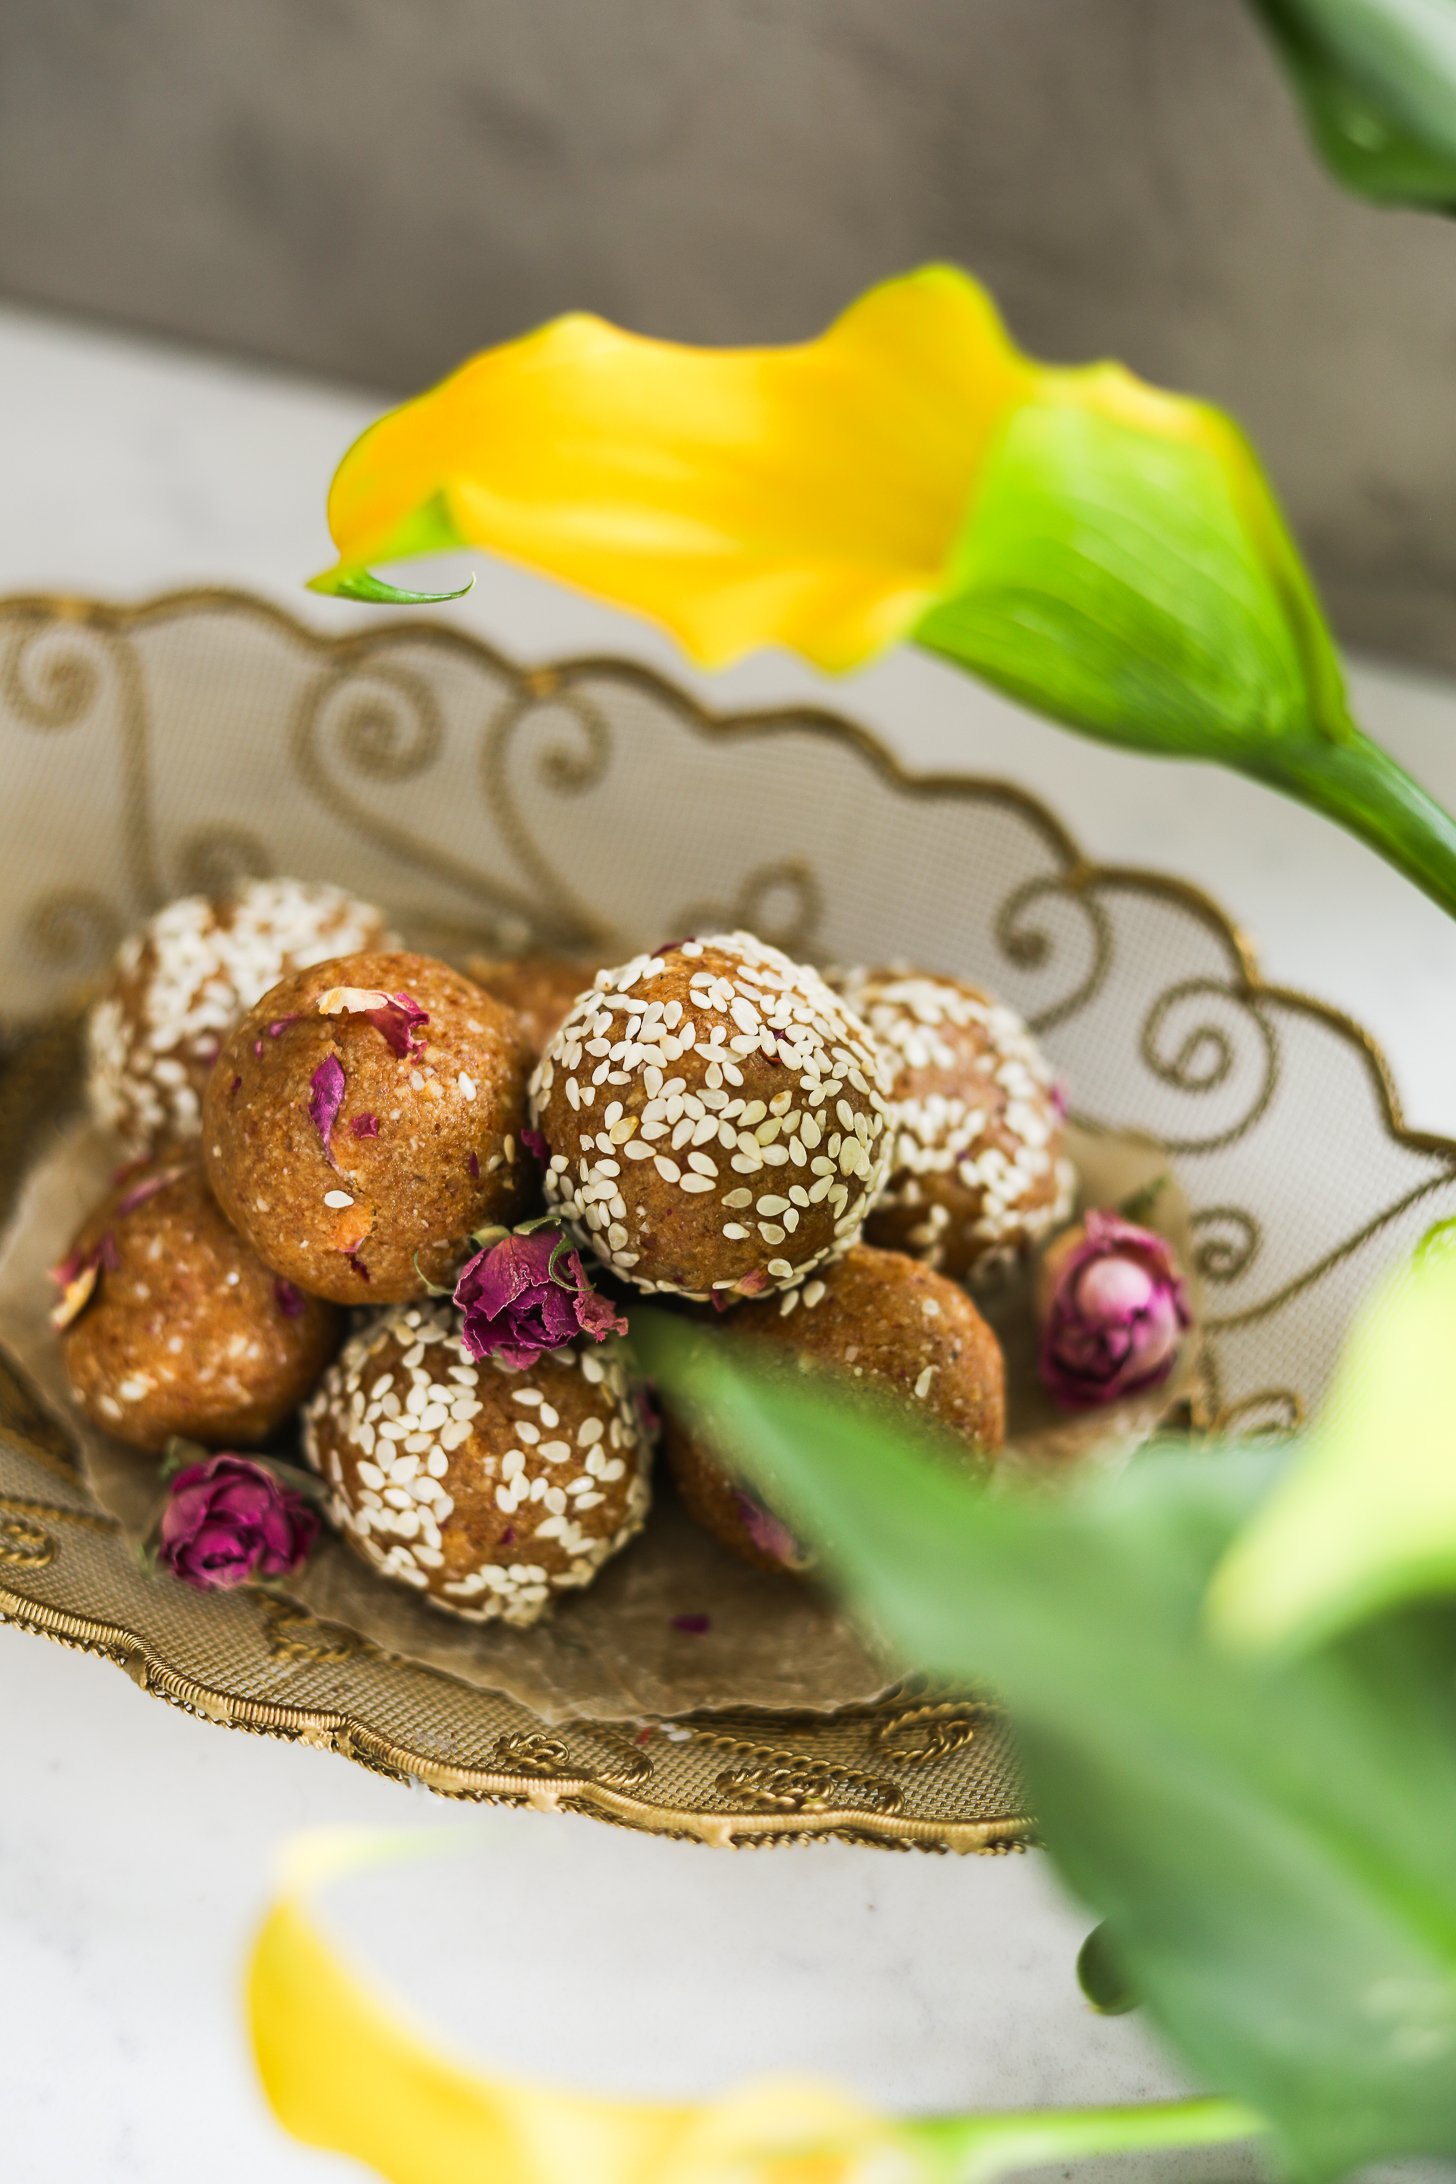 Gold oval tray with energy balls, half coated in sesame seeds, adorned with dried roses, beside yellow lilies.